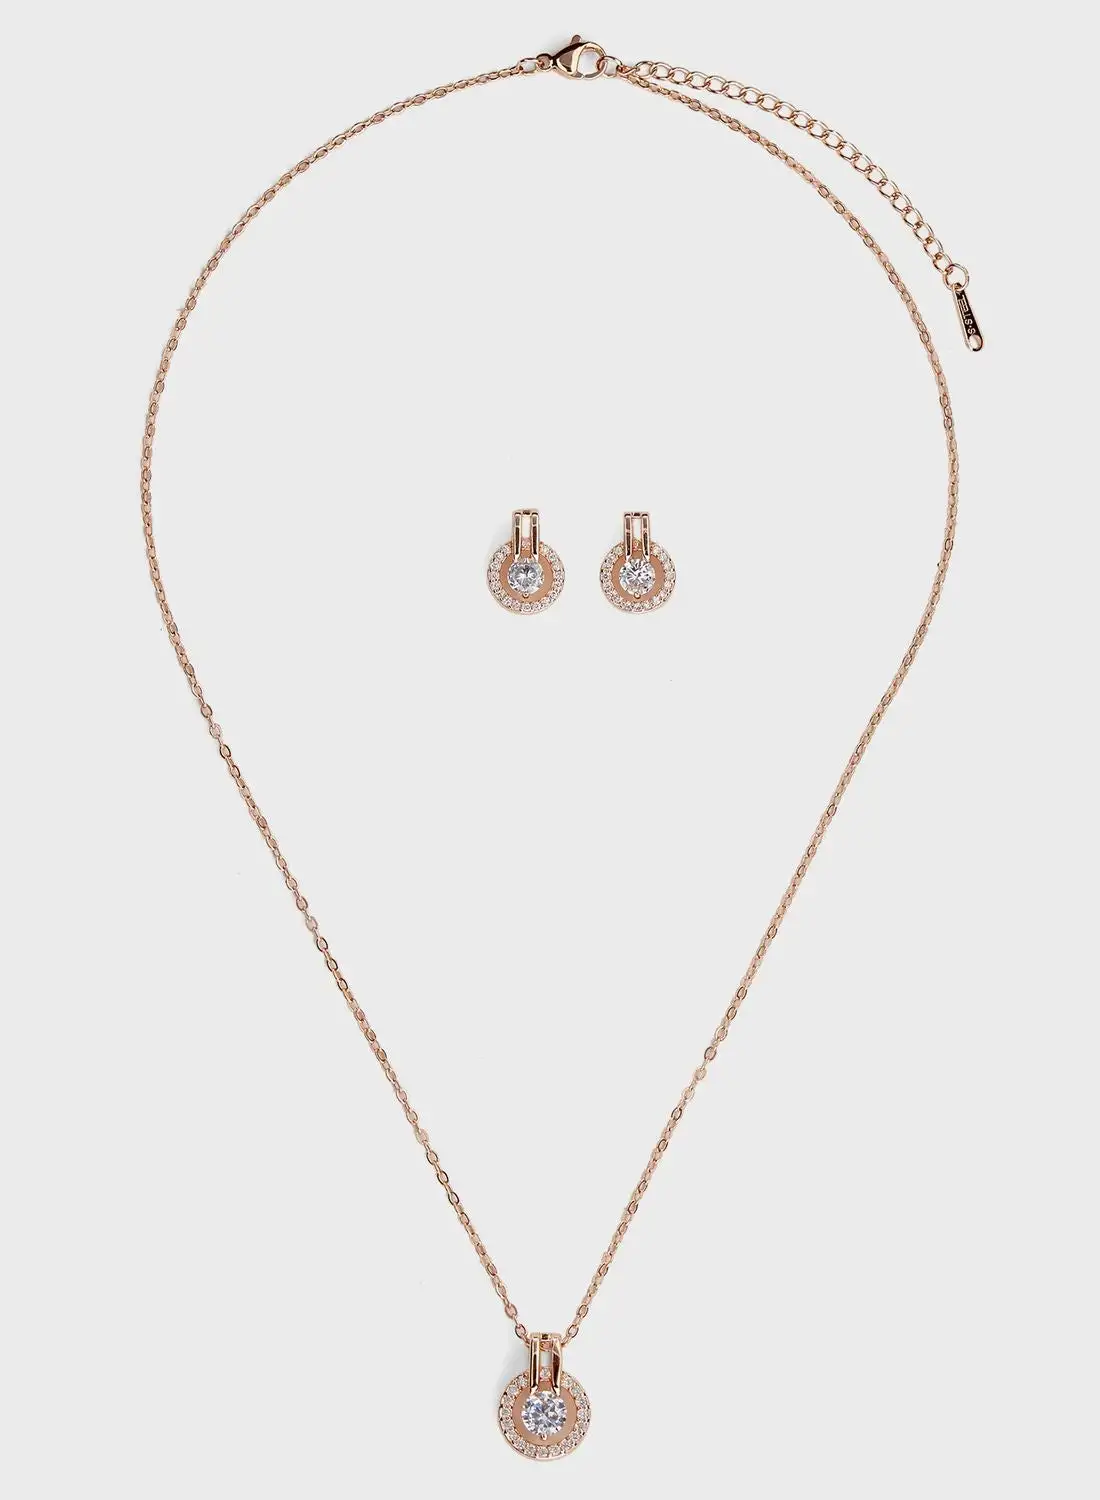 Ella Limited Edition Cz  Round Pendant Necklace & Earrings Set